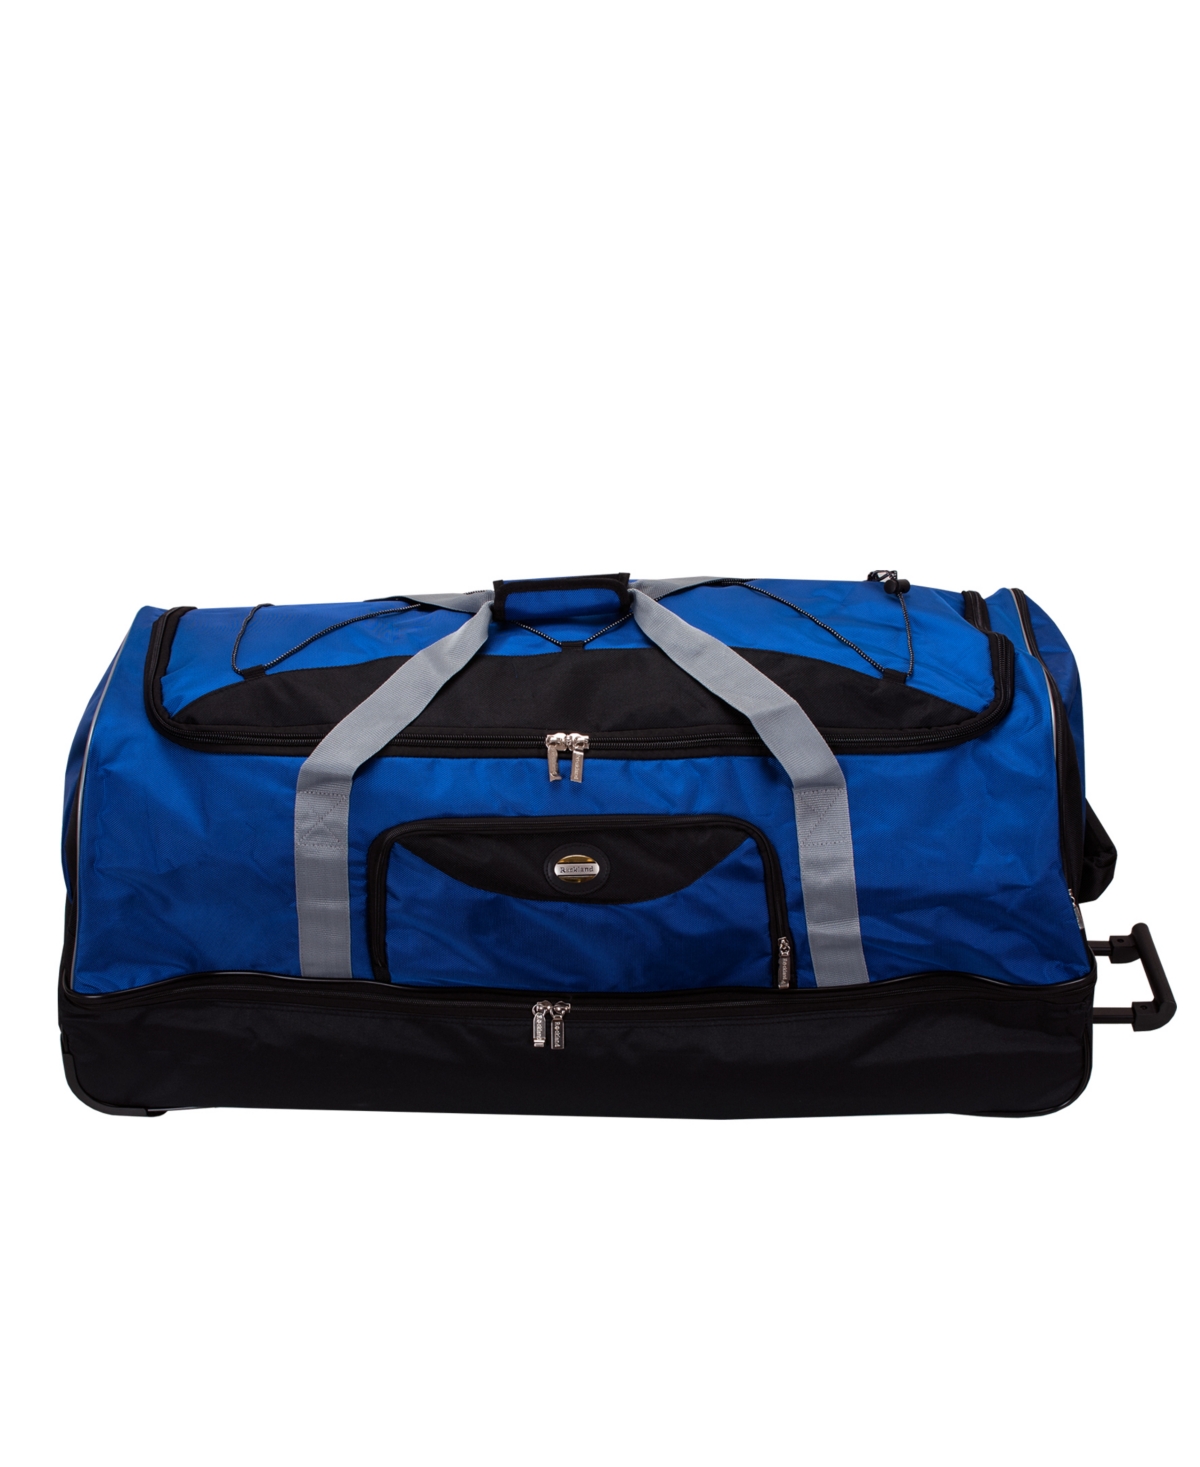 40" Check-In Rolling Duffle Bag - Blue